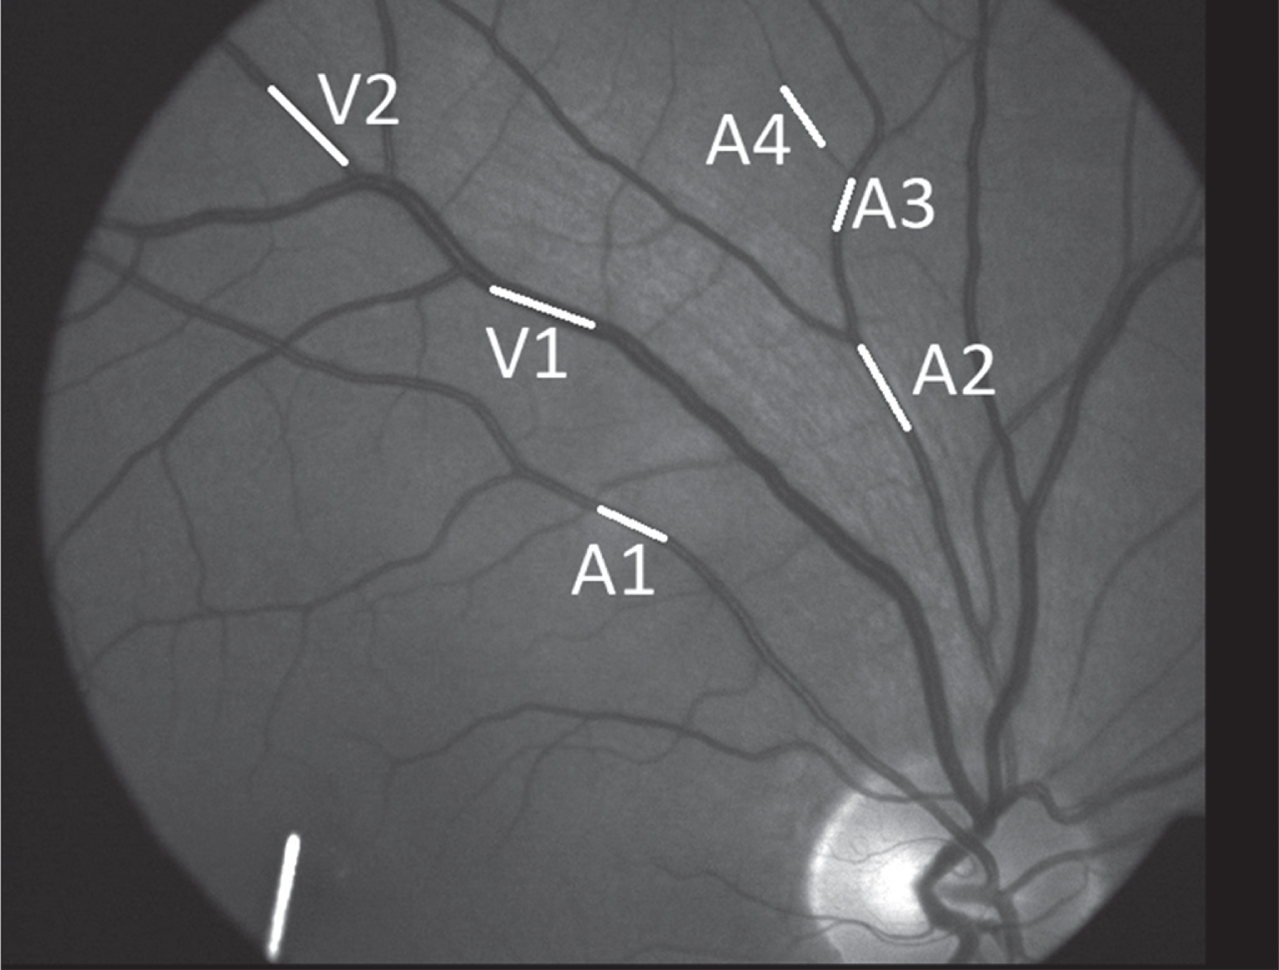 Example of a retinal image in Patient K.H. The DVA analysis program quantifies the absolute vessel diameter in MU (measurement unit) using the Gullstrand’s eye as a template. The average of three 30s recording just prior to every flicker light was taken as the baseline value (100%) for the analysis of the evoked dilation response. Larger and smaller arteries and veins at different branch orders: first (A1, V1), second (A2, V2), third (A3) and fourth order (A4). Because the DVA images focus mostly on the central retina, only few 3rd or 4th order vein branches can be measured.